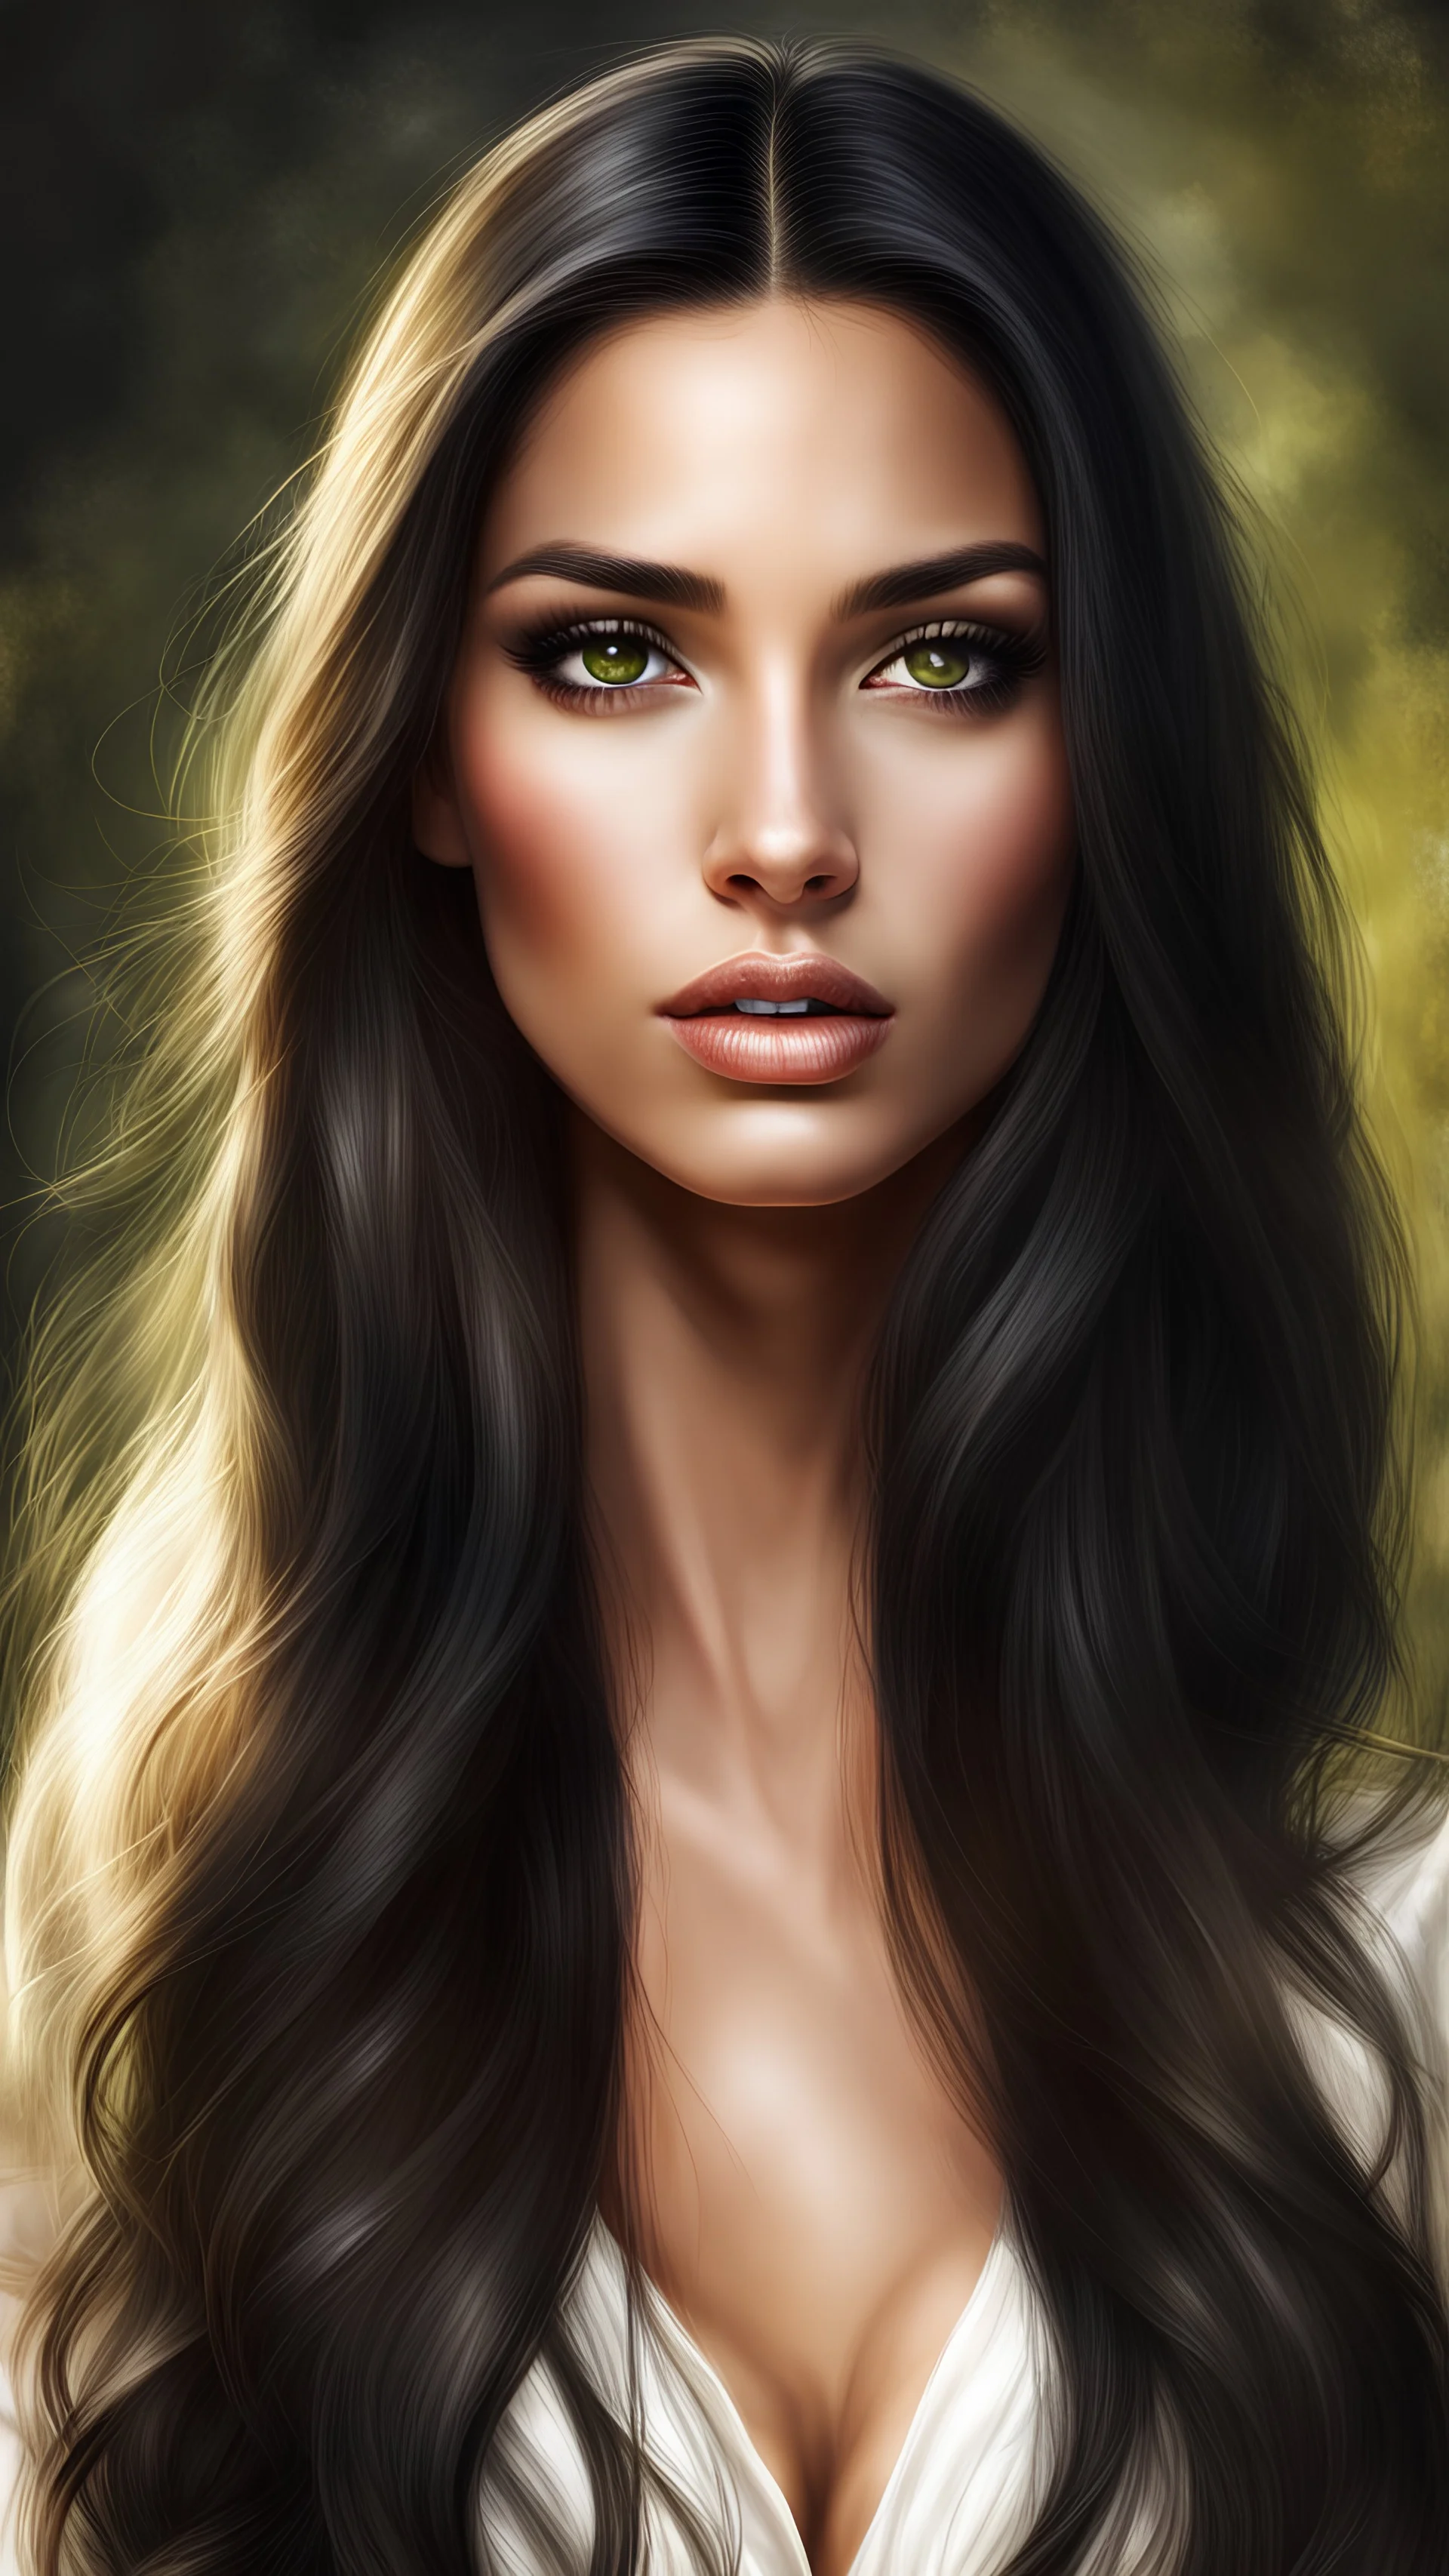 Portrait of an Olive skinned beautiful woman with long dark hair, photorealistic, fantasy